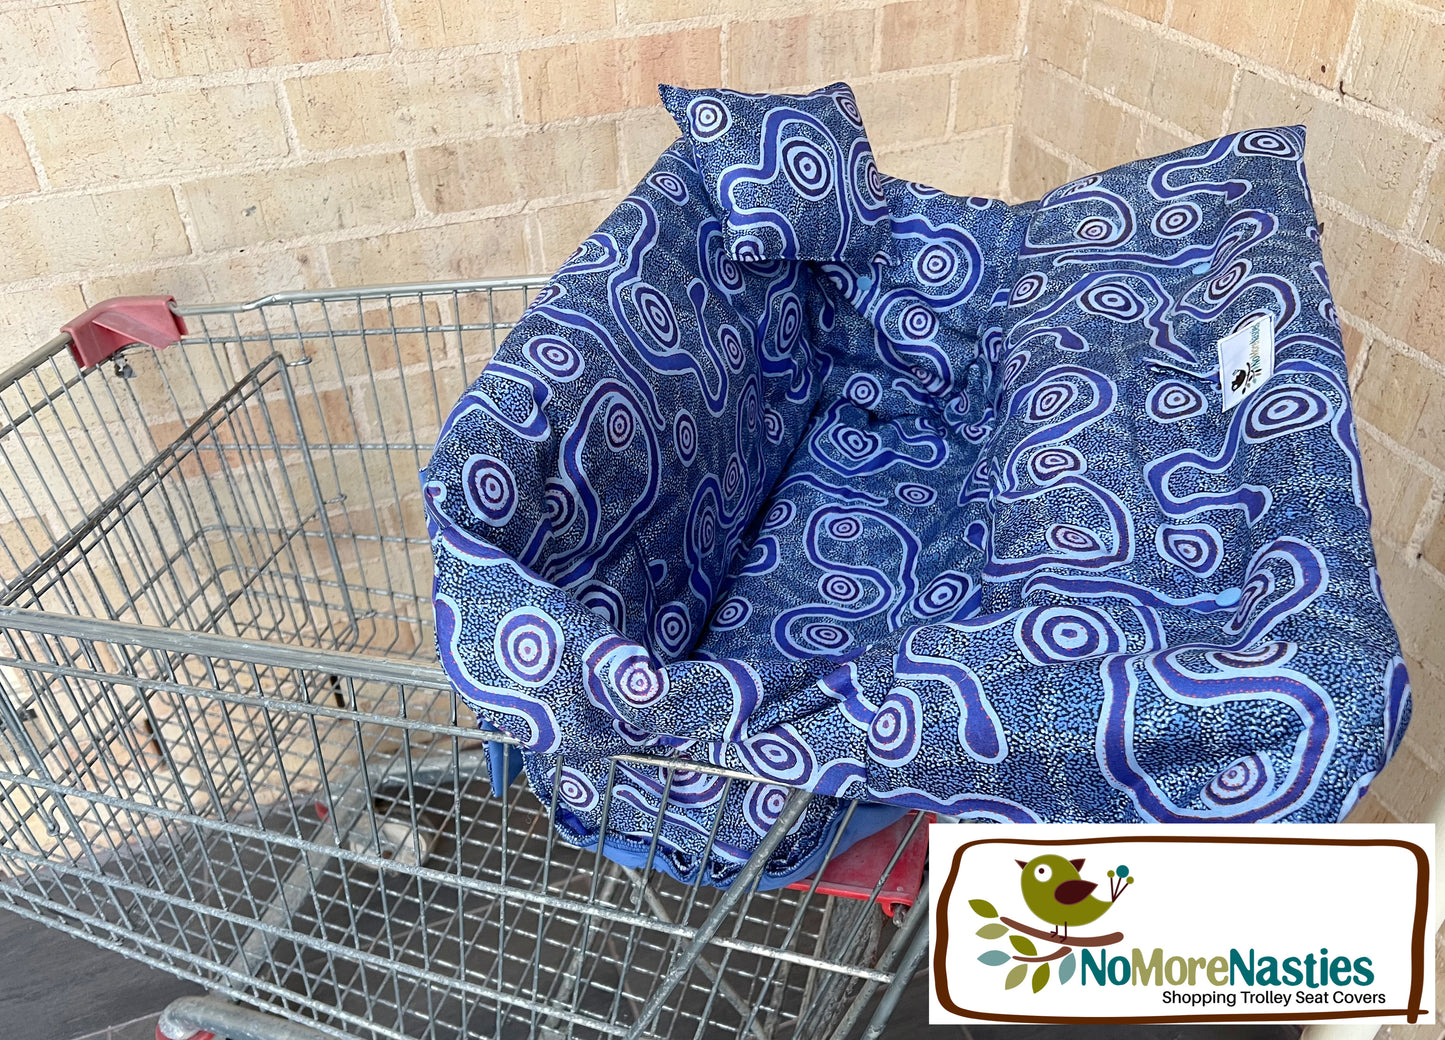 Snake Dreaming Deluxe Shopping Trolley Seat Cover